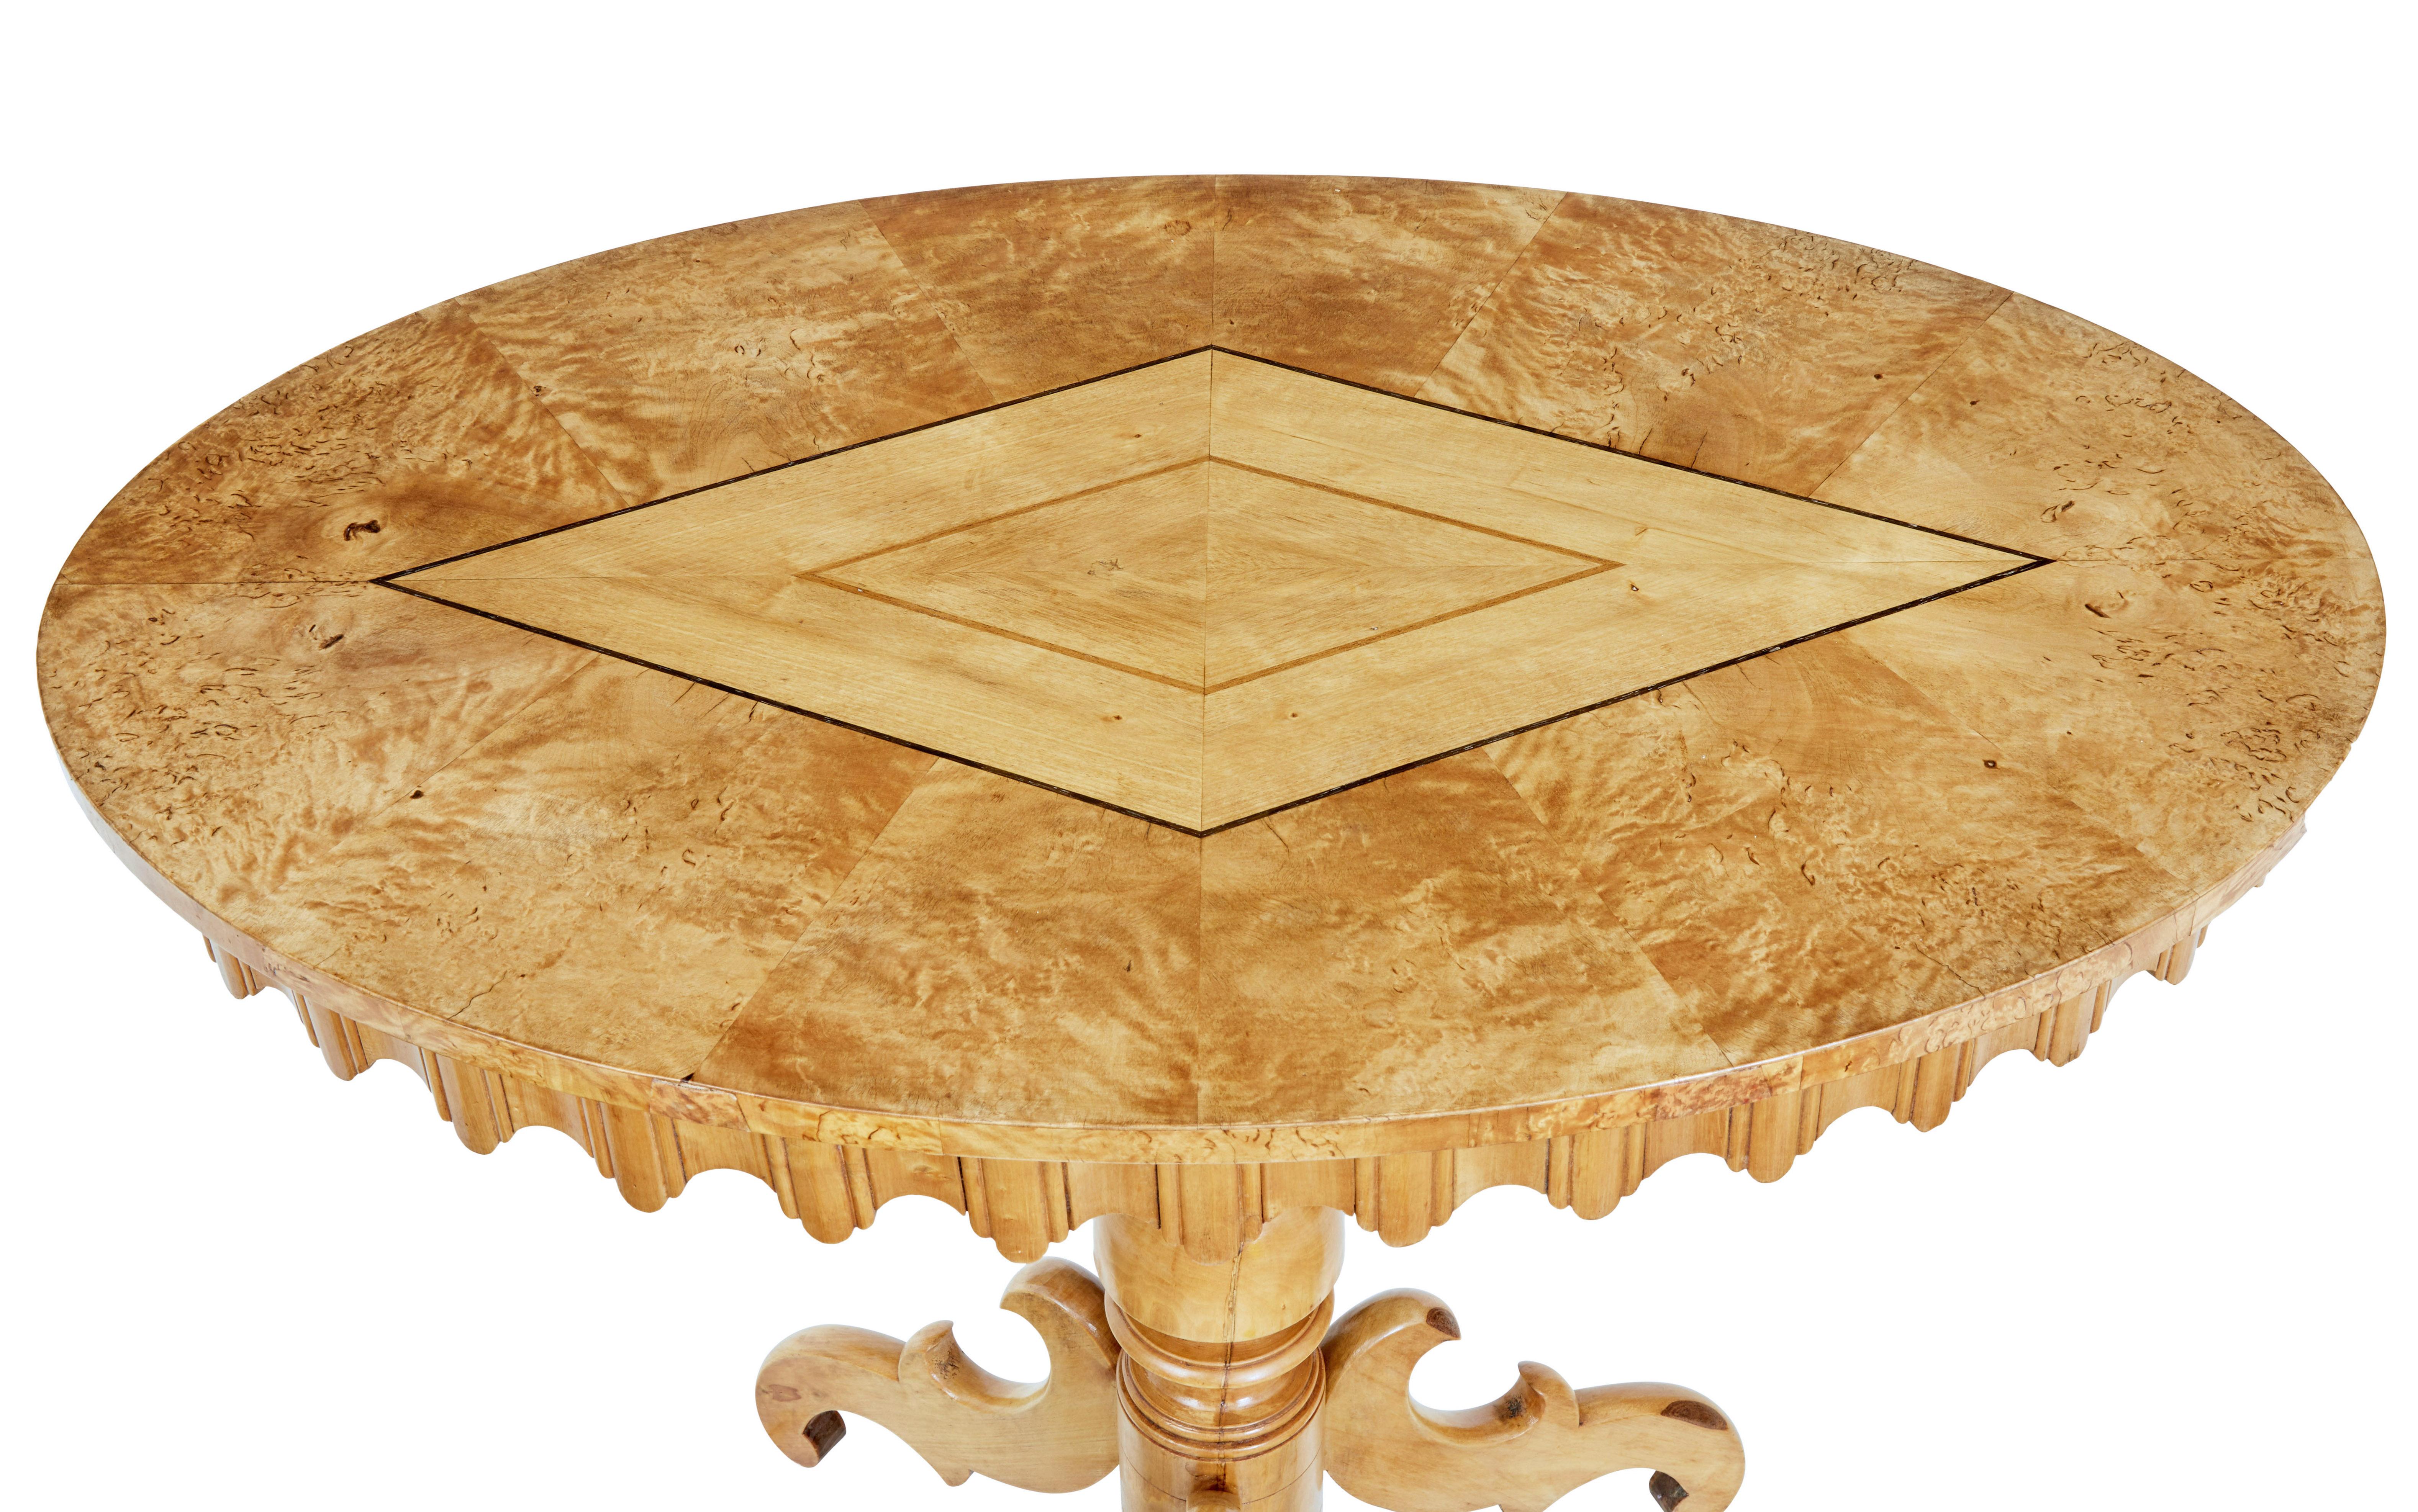 A Swedish birch inlaid occasional pedestal table from circa 1860 with oval top, radiating veneer, inlaid diamond motif, turned pedestal and carved tripod base. A Swedish birch inlaid occasional pedestal table from circa 1860, exuding classical